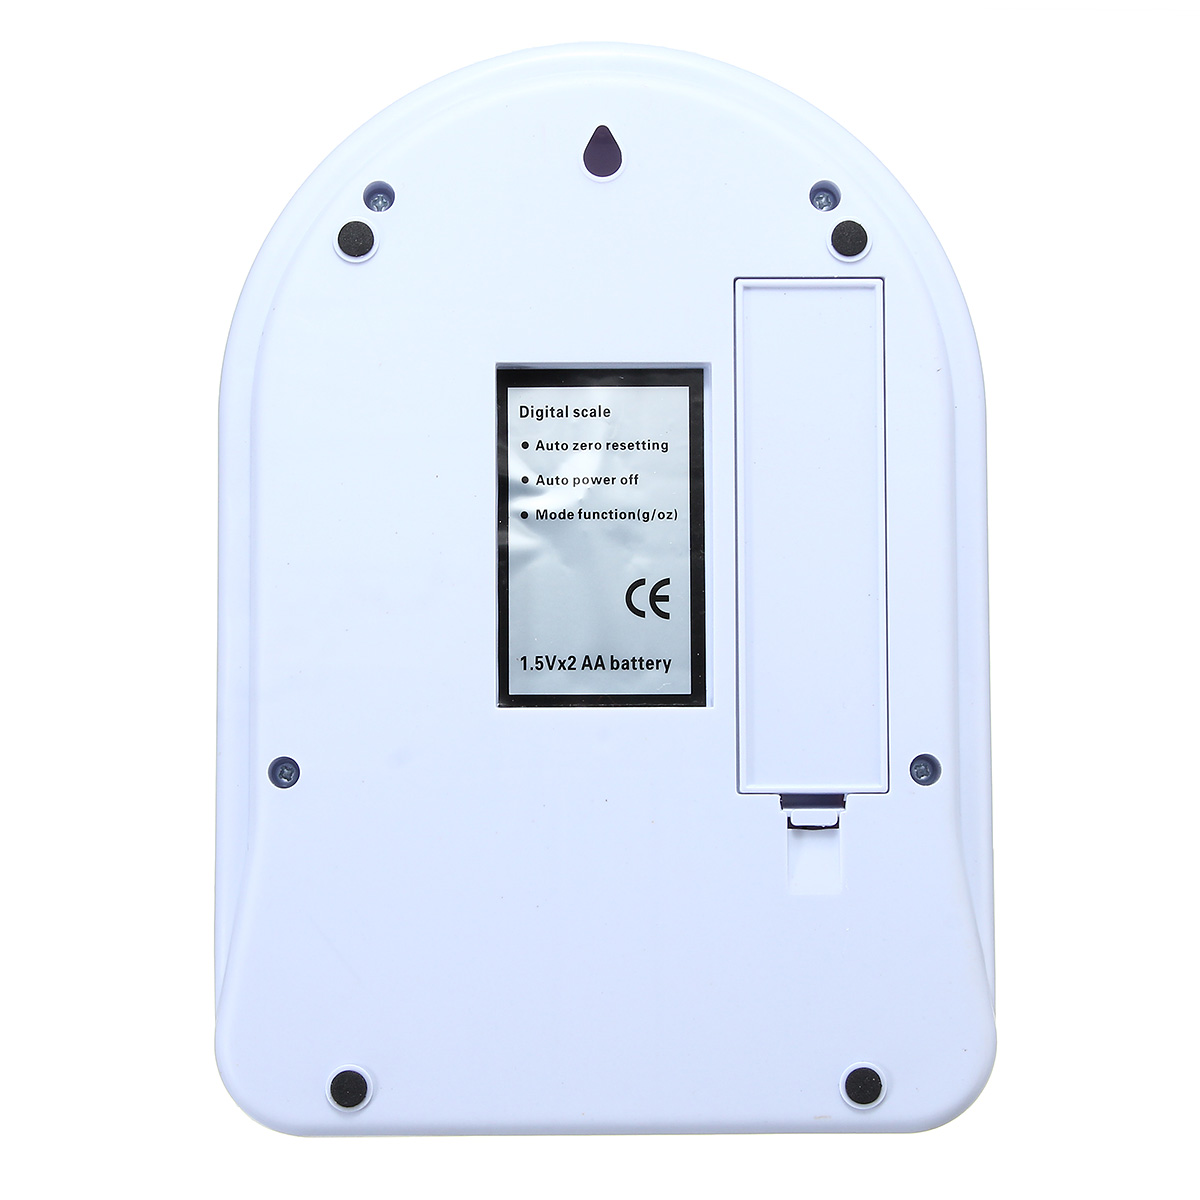 10kg1g-Digital-Electronic-Postal-Scale-Postage-Parcel-Weighing-Weight-Scale-1123879